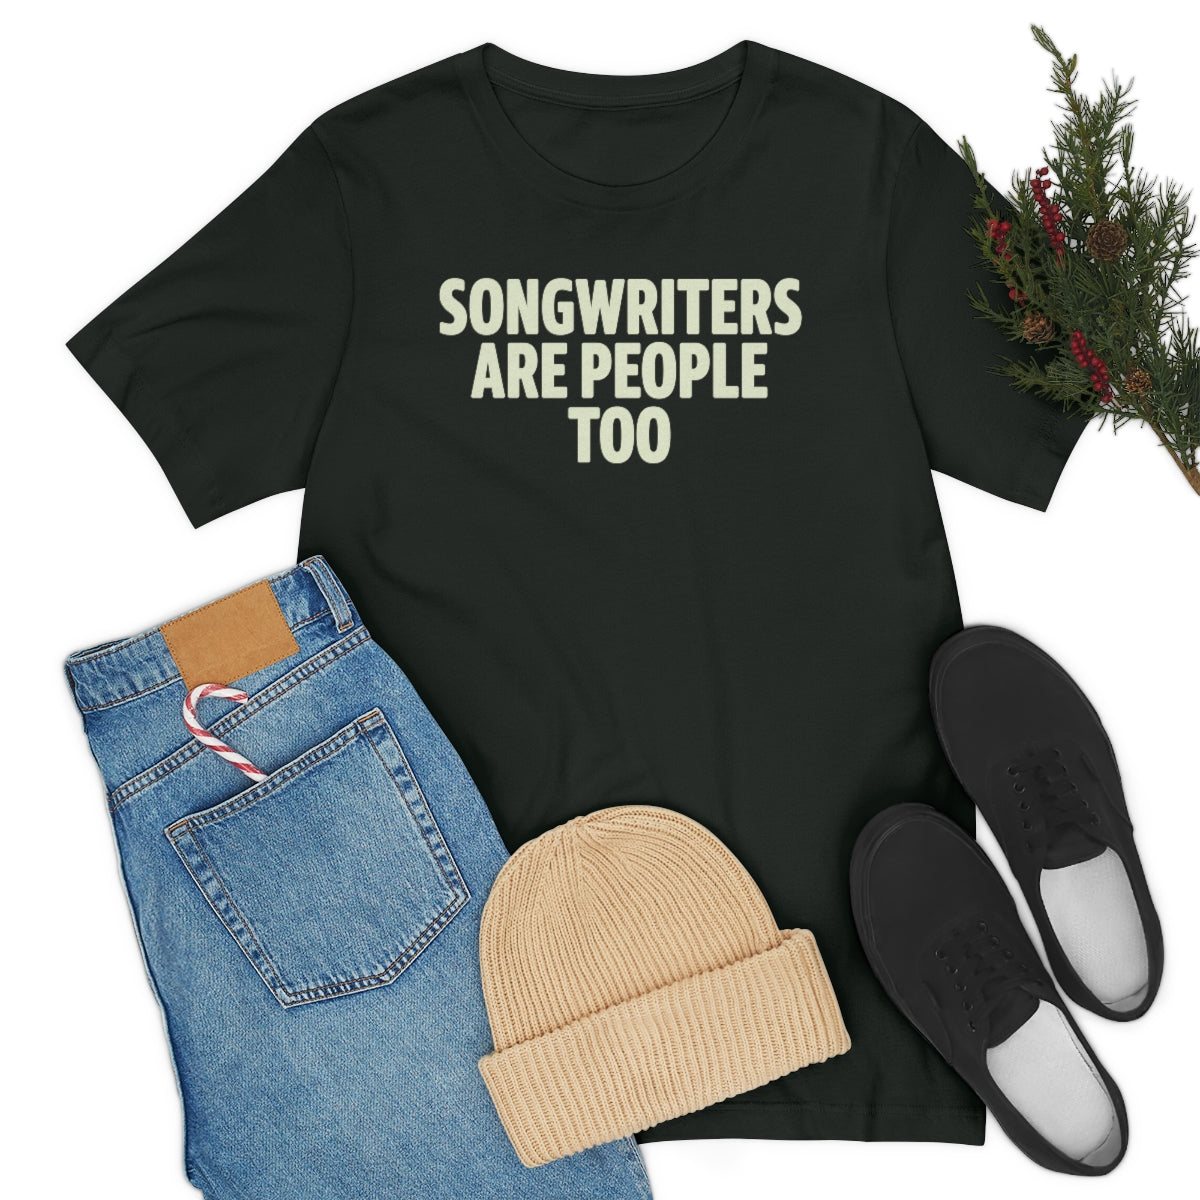 Songwriters are people too